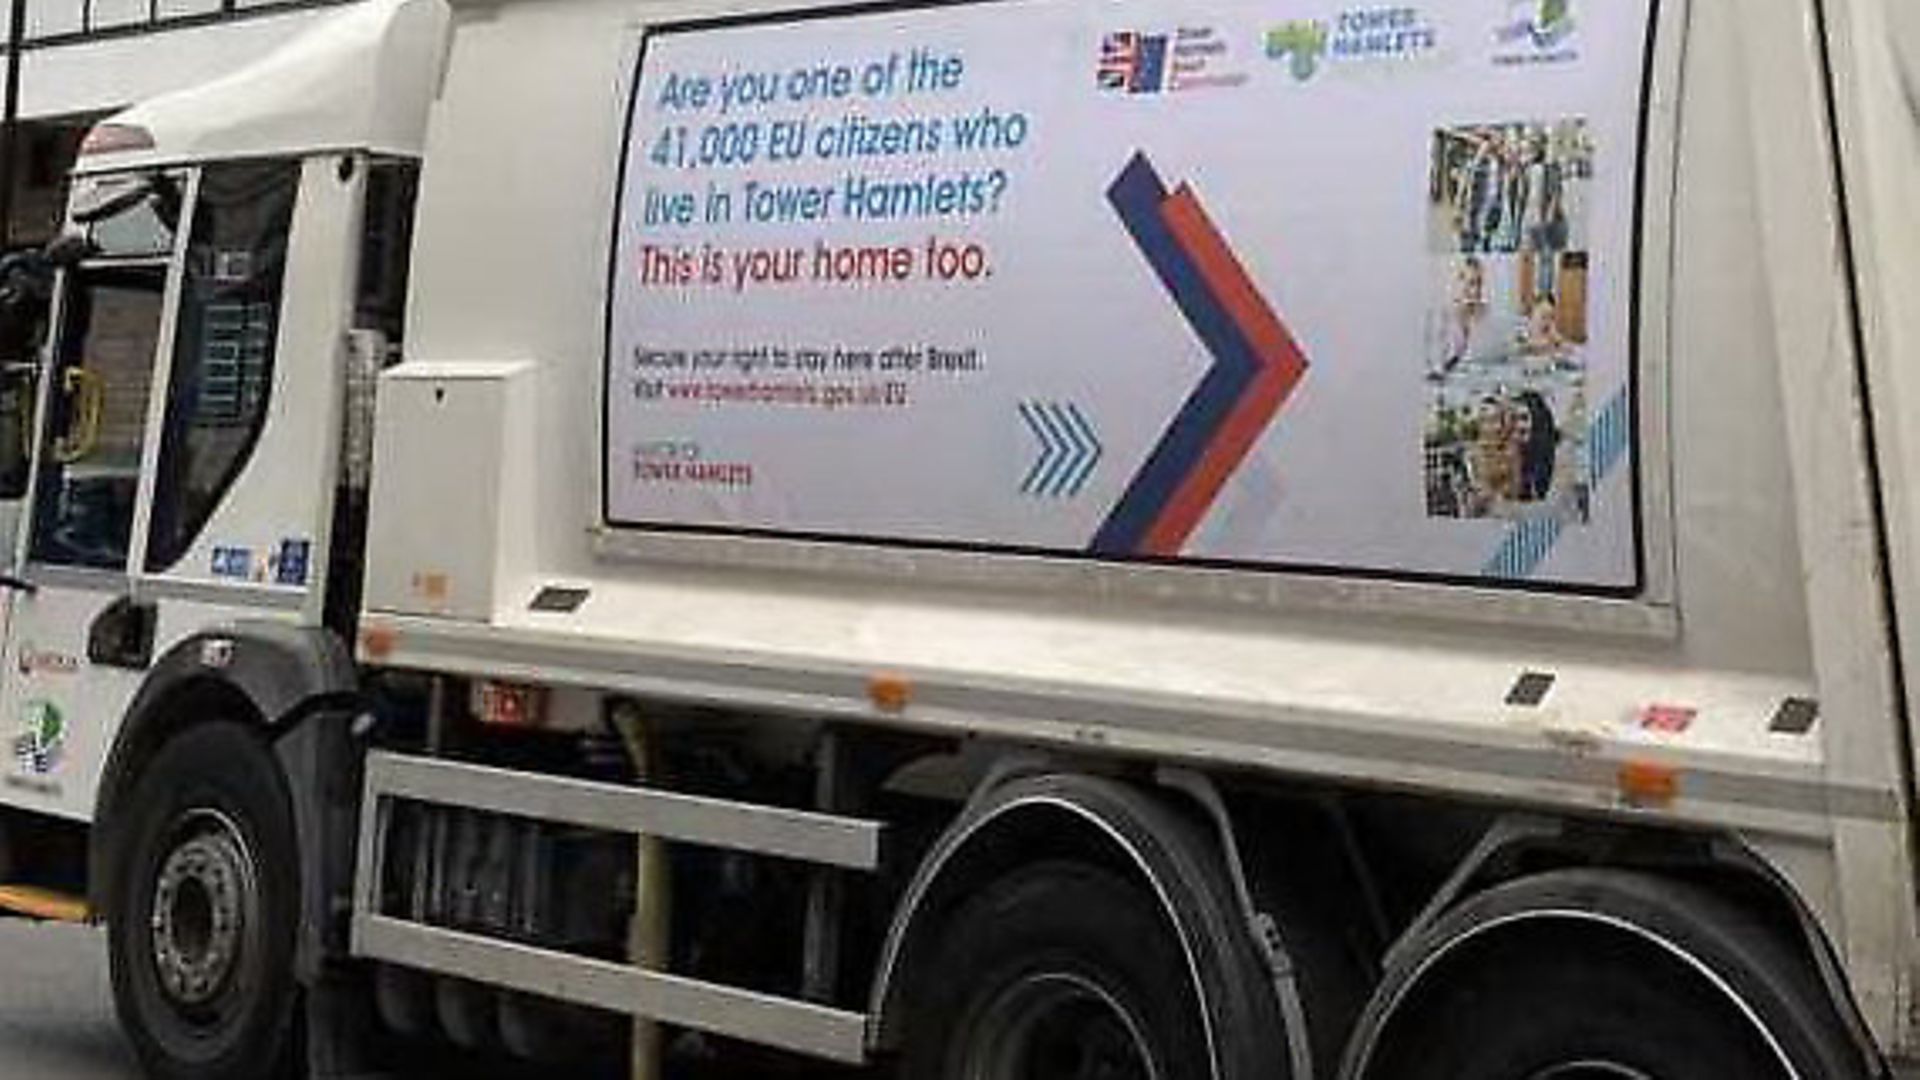 The bin lorry in Tower Hamlets telling EU citizens 'this is your home too' Pic: @Milo_Edwards - Credit: @Milo_Edwards